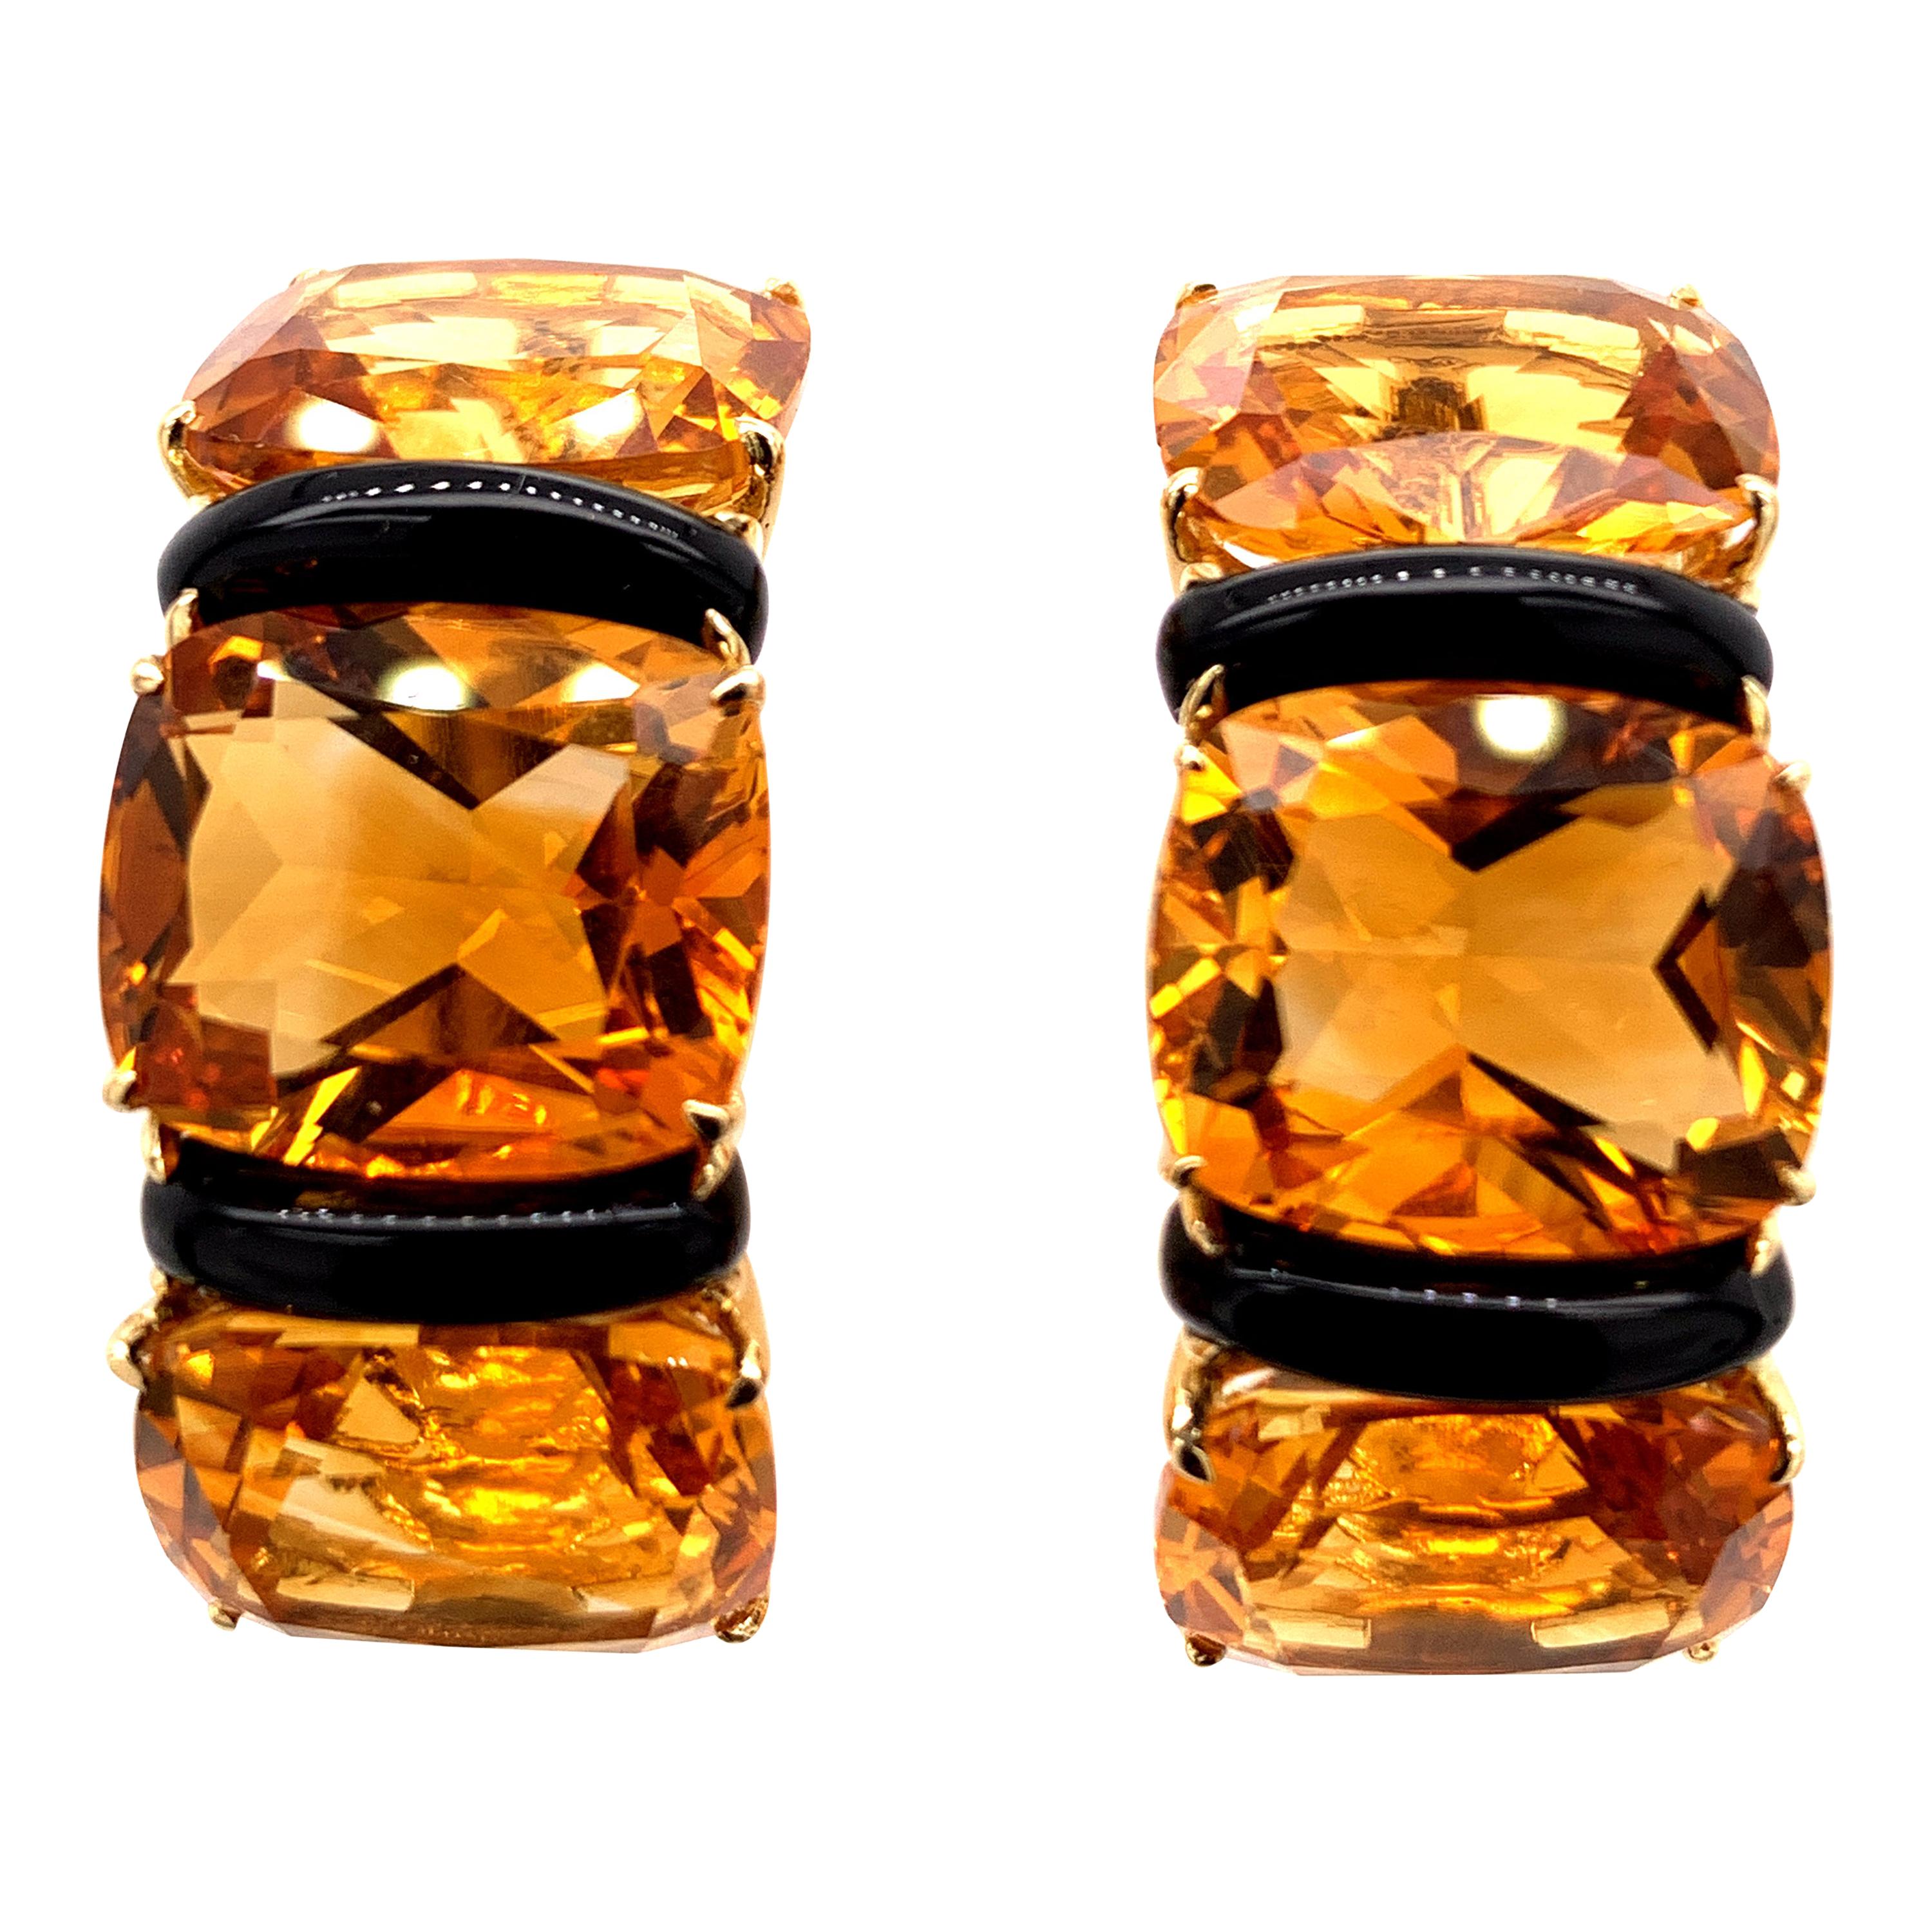 Large Striking Seaman Schepps Gold, Citrine and Onyx Earclips